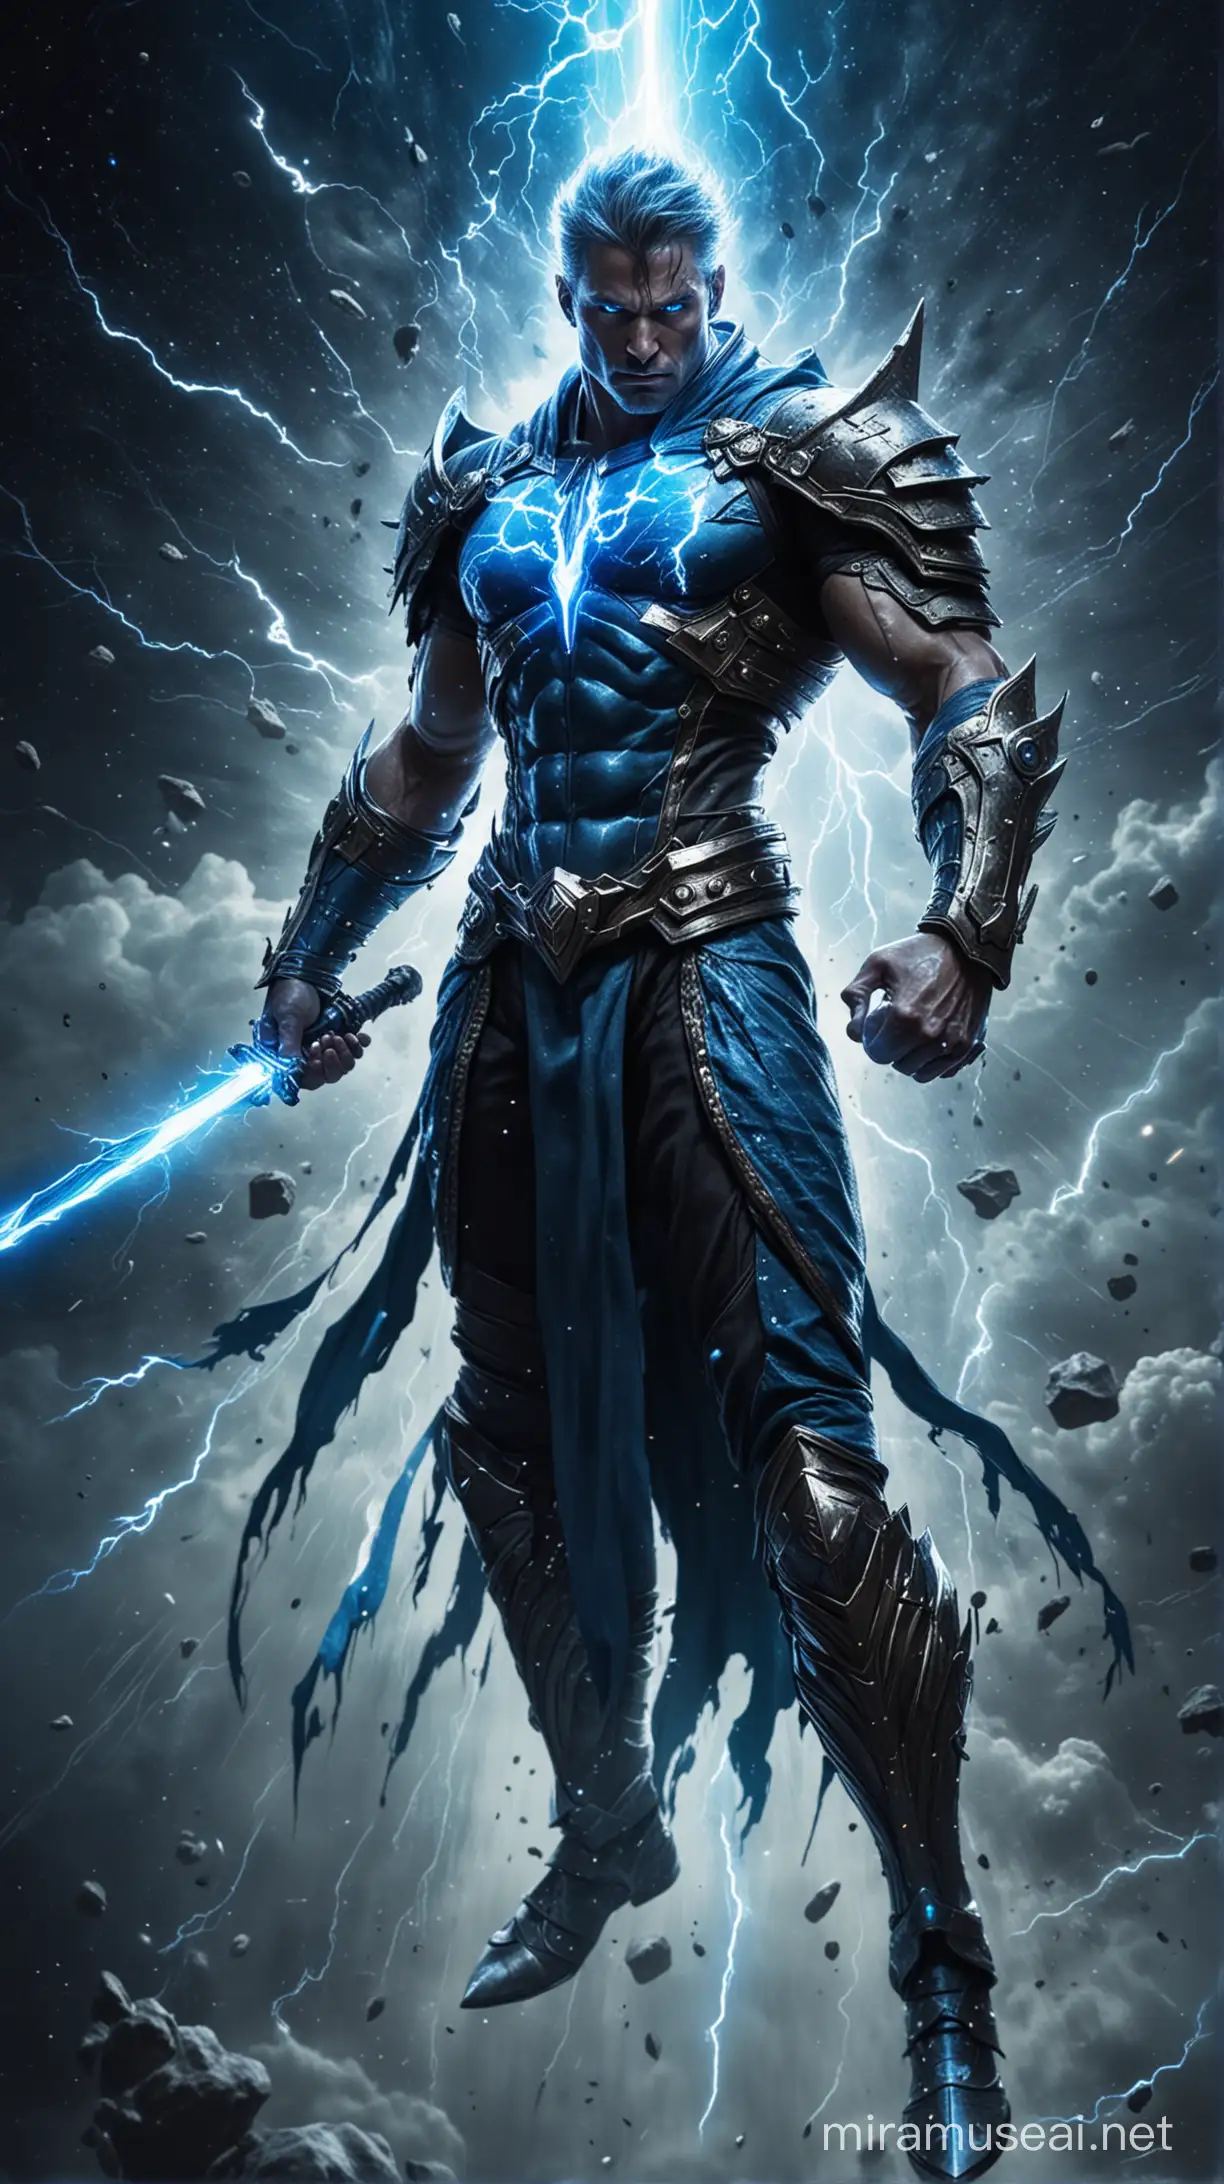 Cosmic warrior, cosmic, aggressive, sword, detailed hands, blue lightning all over his body, floating in the space